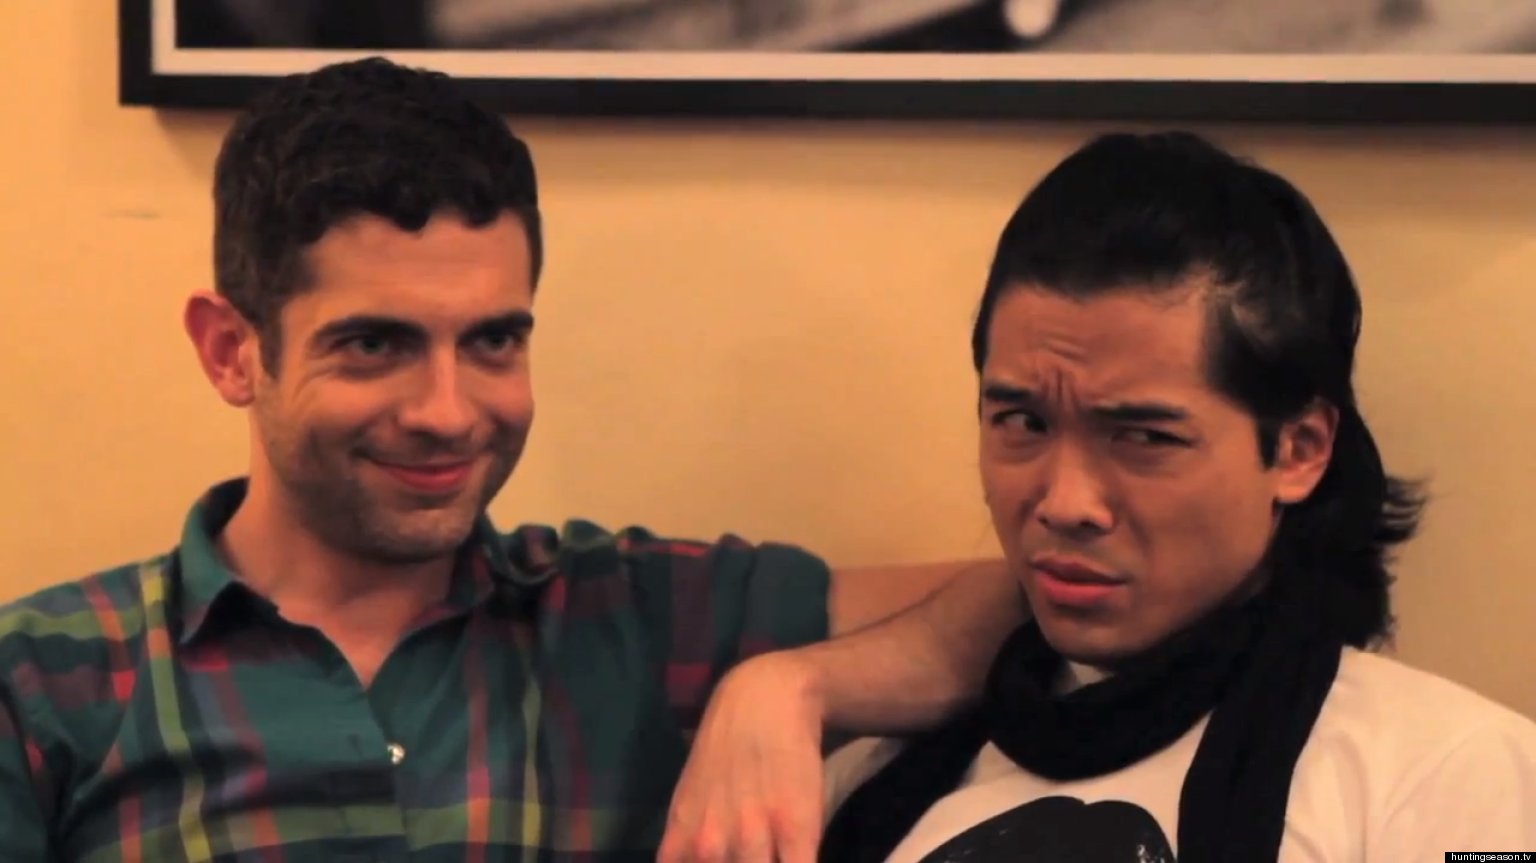 'Personalized TV': Why I Made a Gay Web Series (VIDEO) | HuffPost